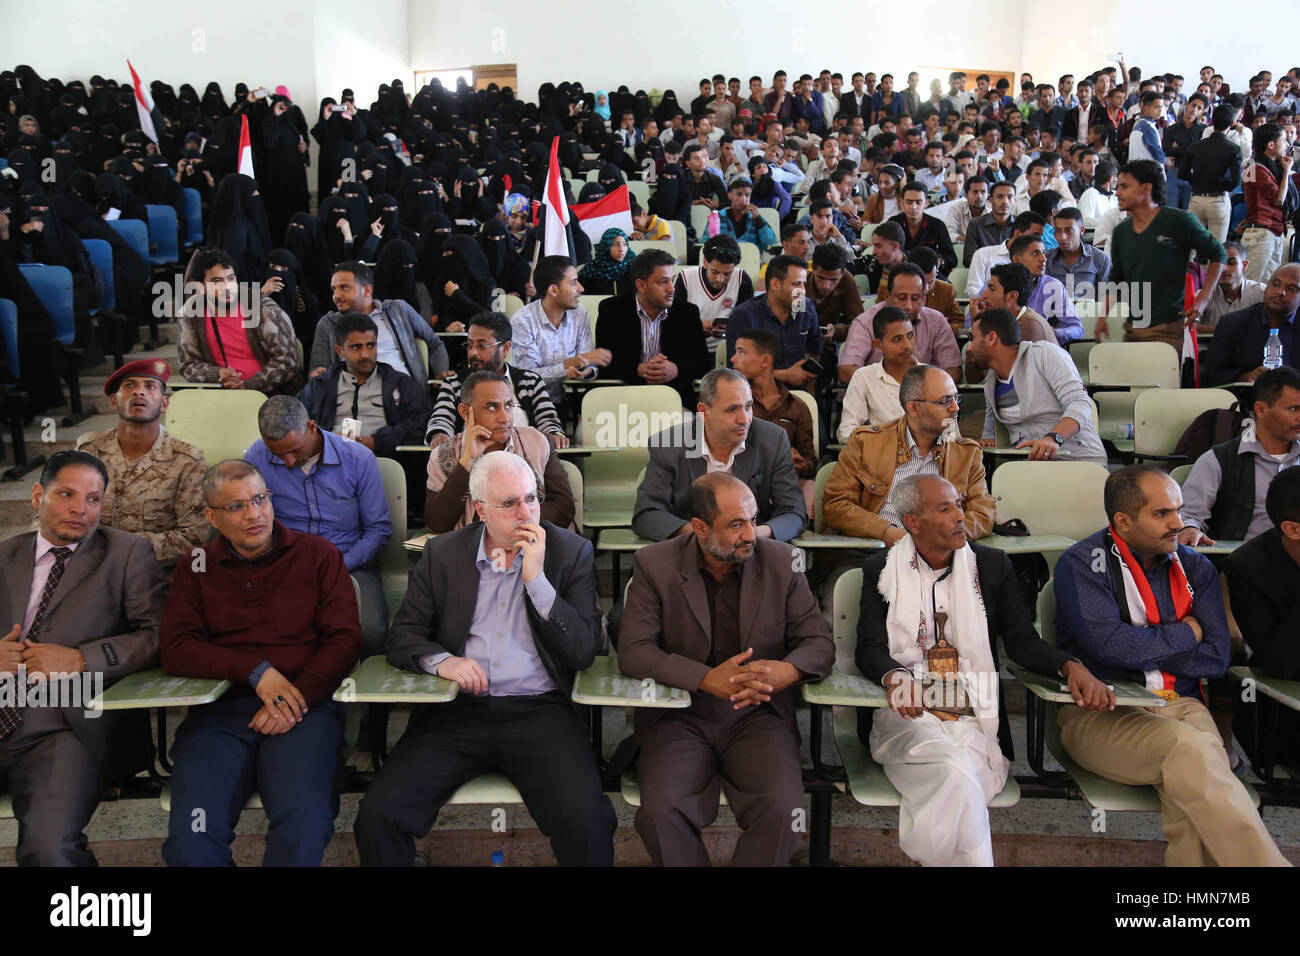 February 9, 2017 - Celebrations have taken place in the university campus of the city of Taiz to commemorate the sixth anniversary of the Arab Spring as well as the Yemeni revolution which toppled former president Ali Abdullah Saleh. The celebrations which included performances and speeches, were attended by political and military leaders of well as members of the Taiz resistance (Credit Image: © Abdulnasser Alseddik/ImagesLive via ZUMA Wire) Stock Photo